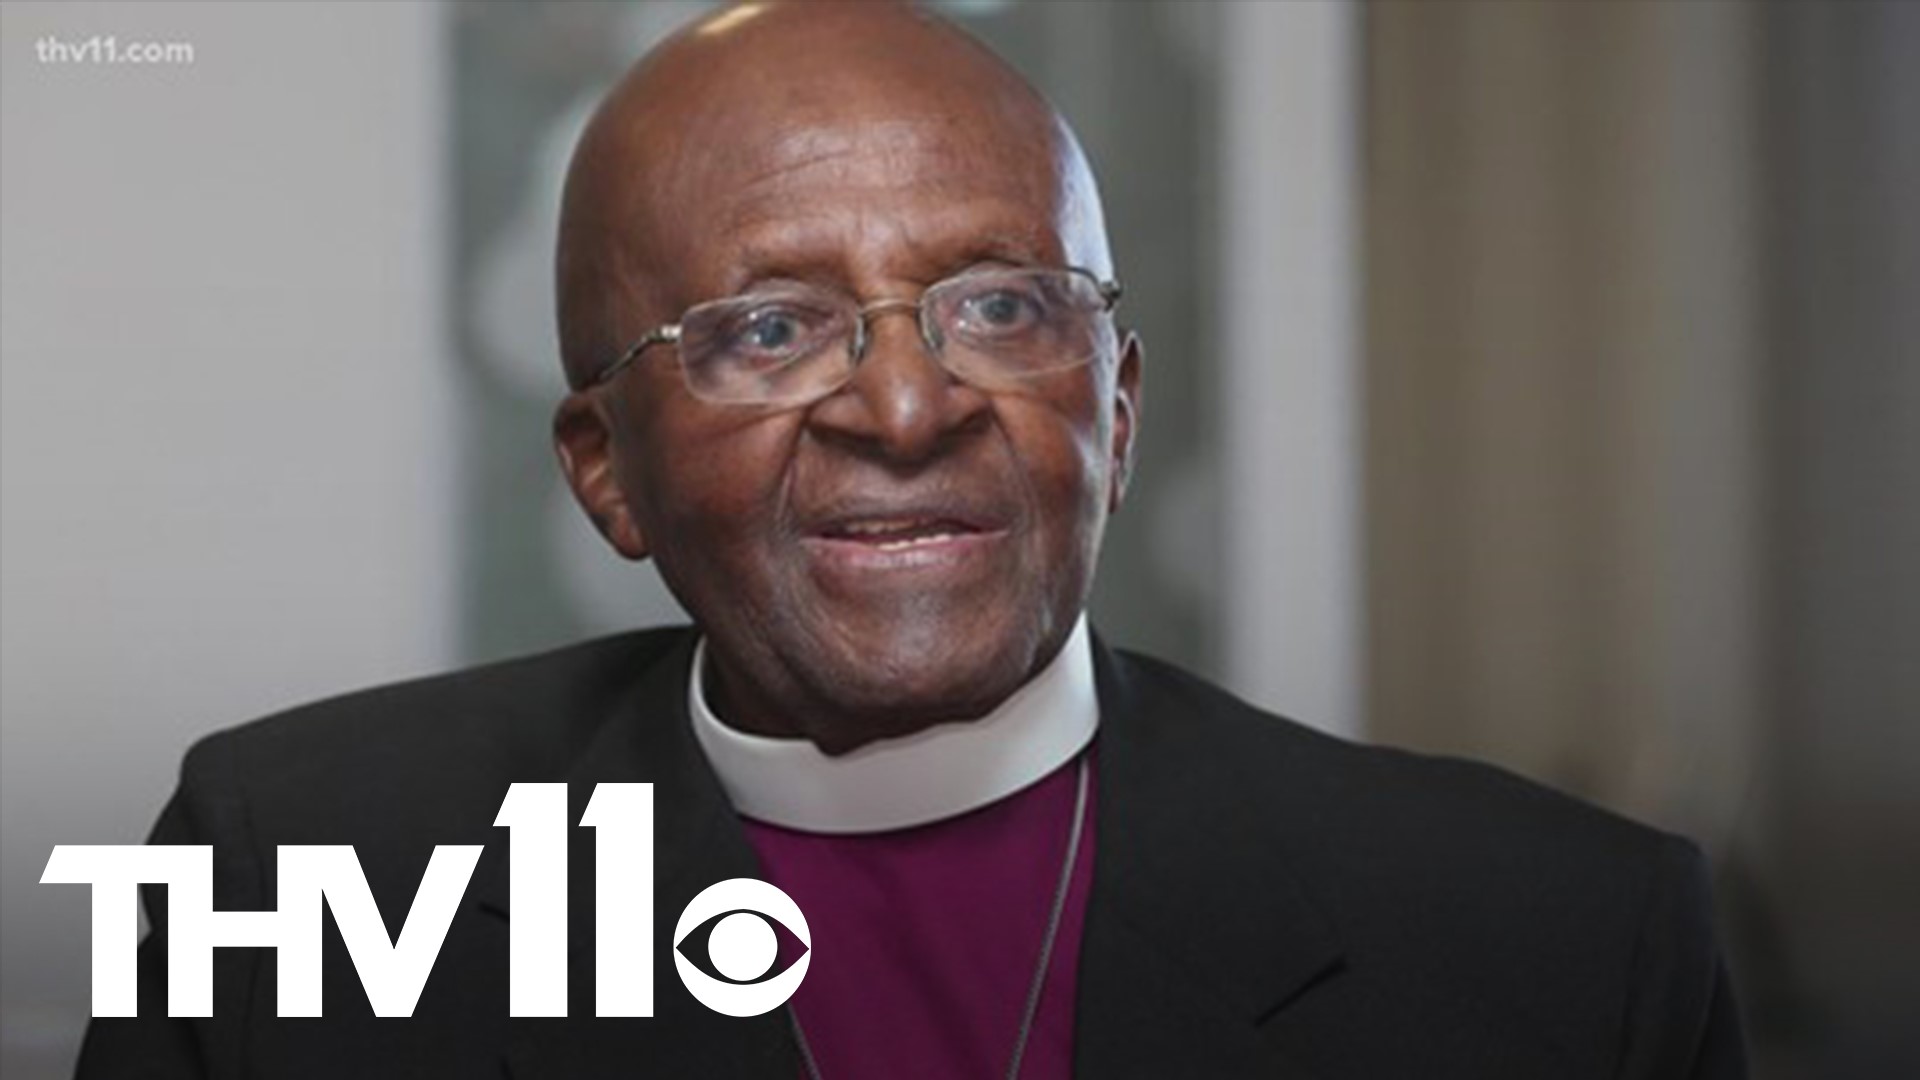 South African social rights activist Desmond Tutu has died. He was 90 years old.